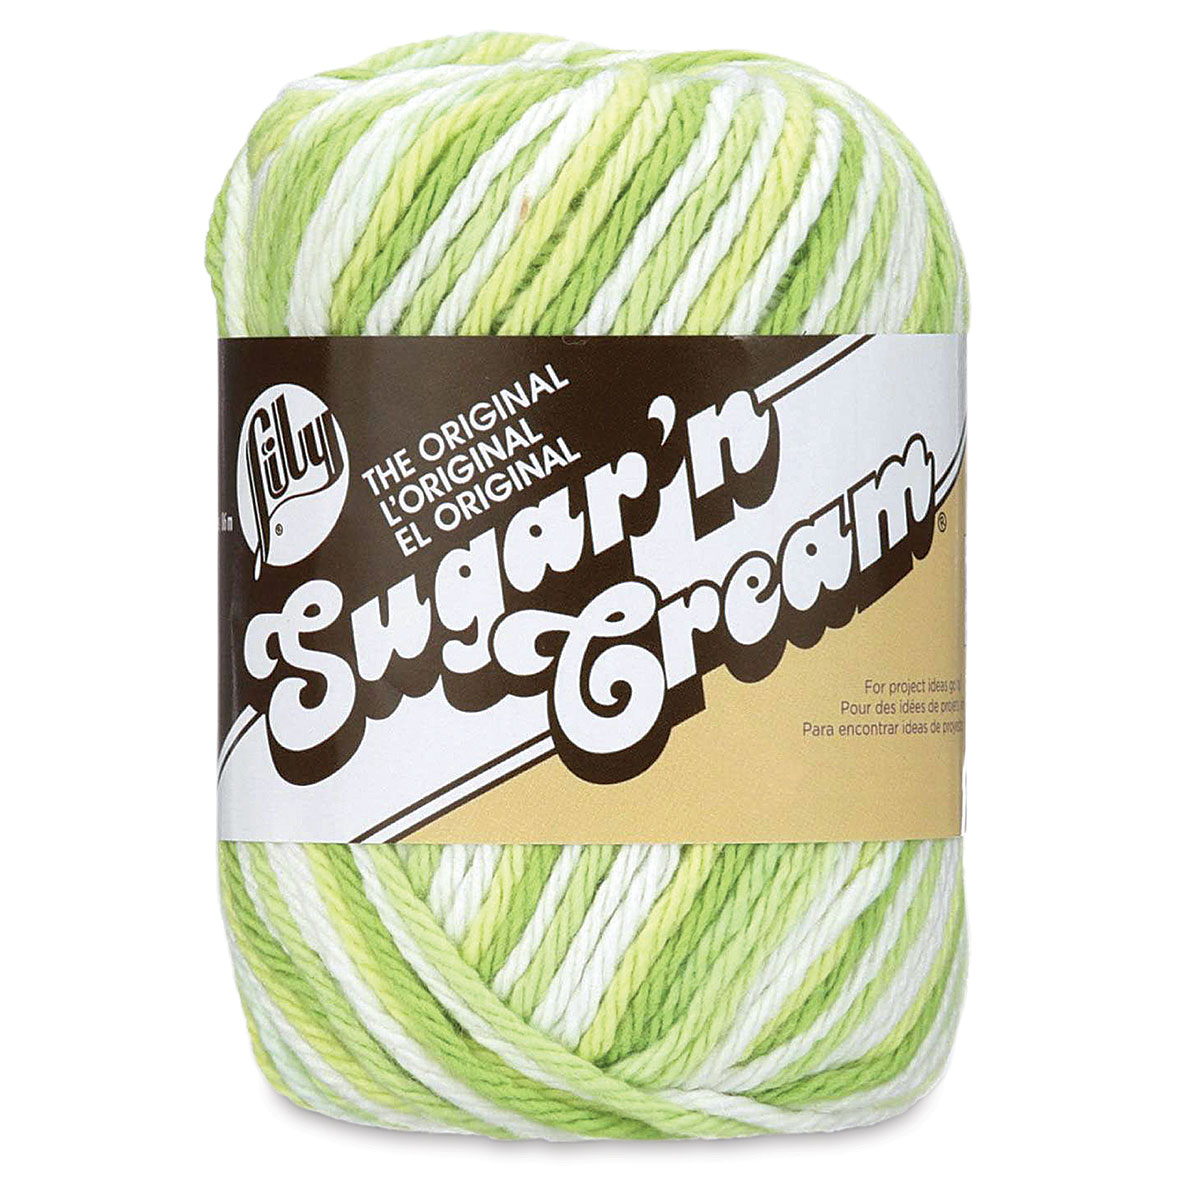 One Size 58 g Per Ball LILY LSC0357 Sugar n Cream Ombre Pack of 6-57.9 g Each Painted Desert 